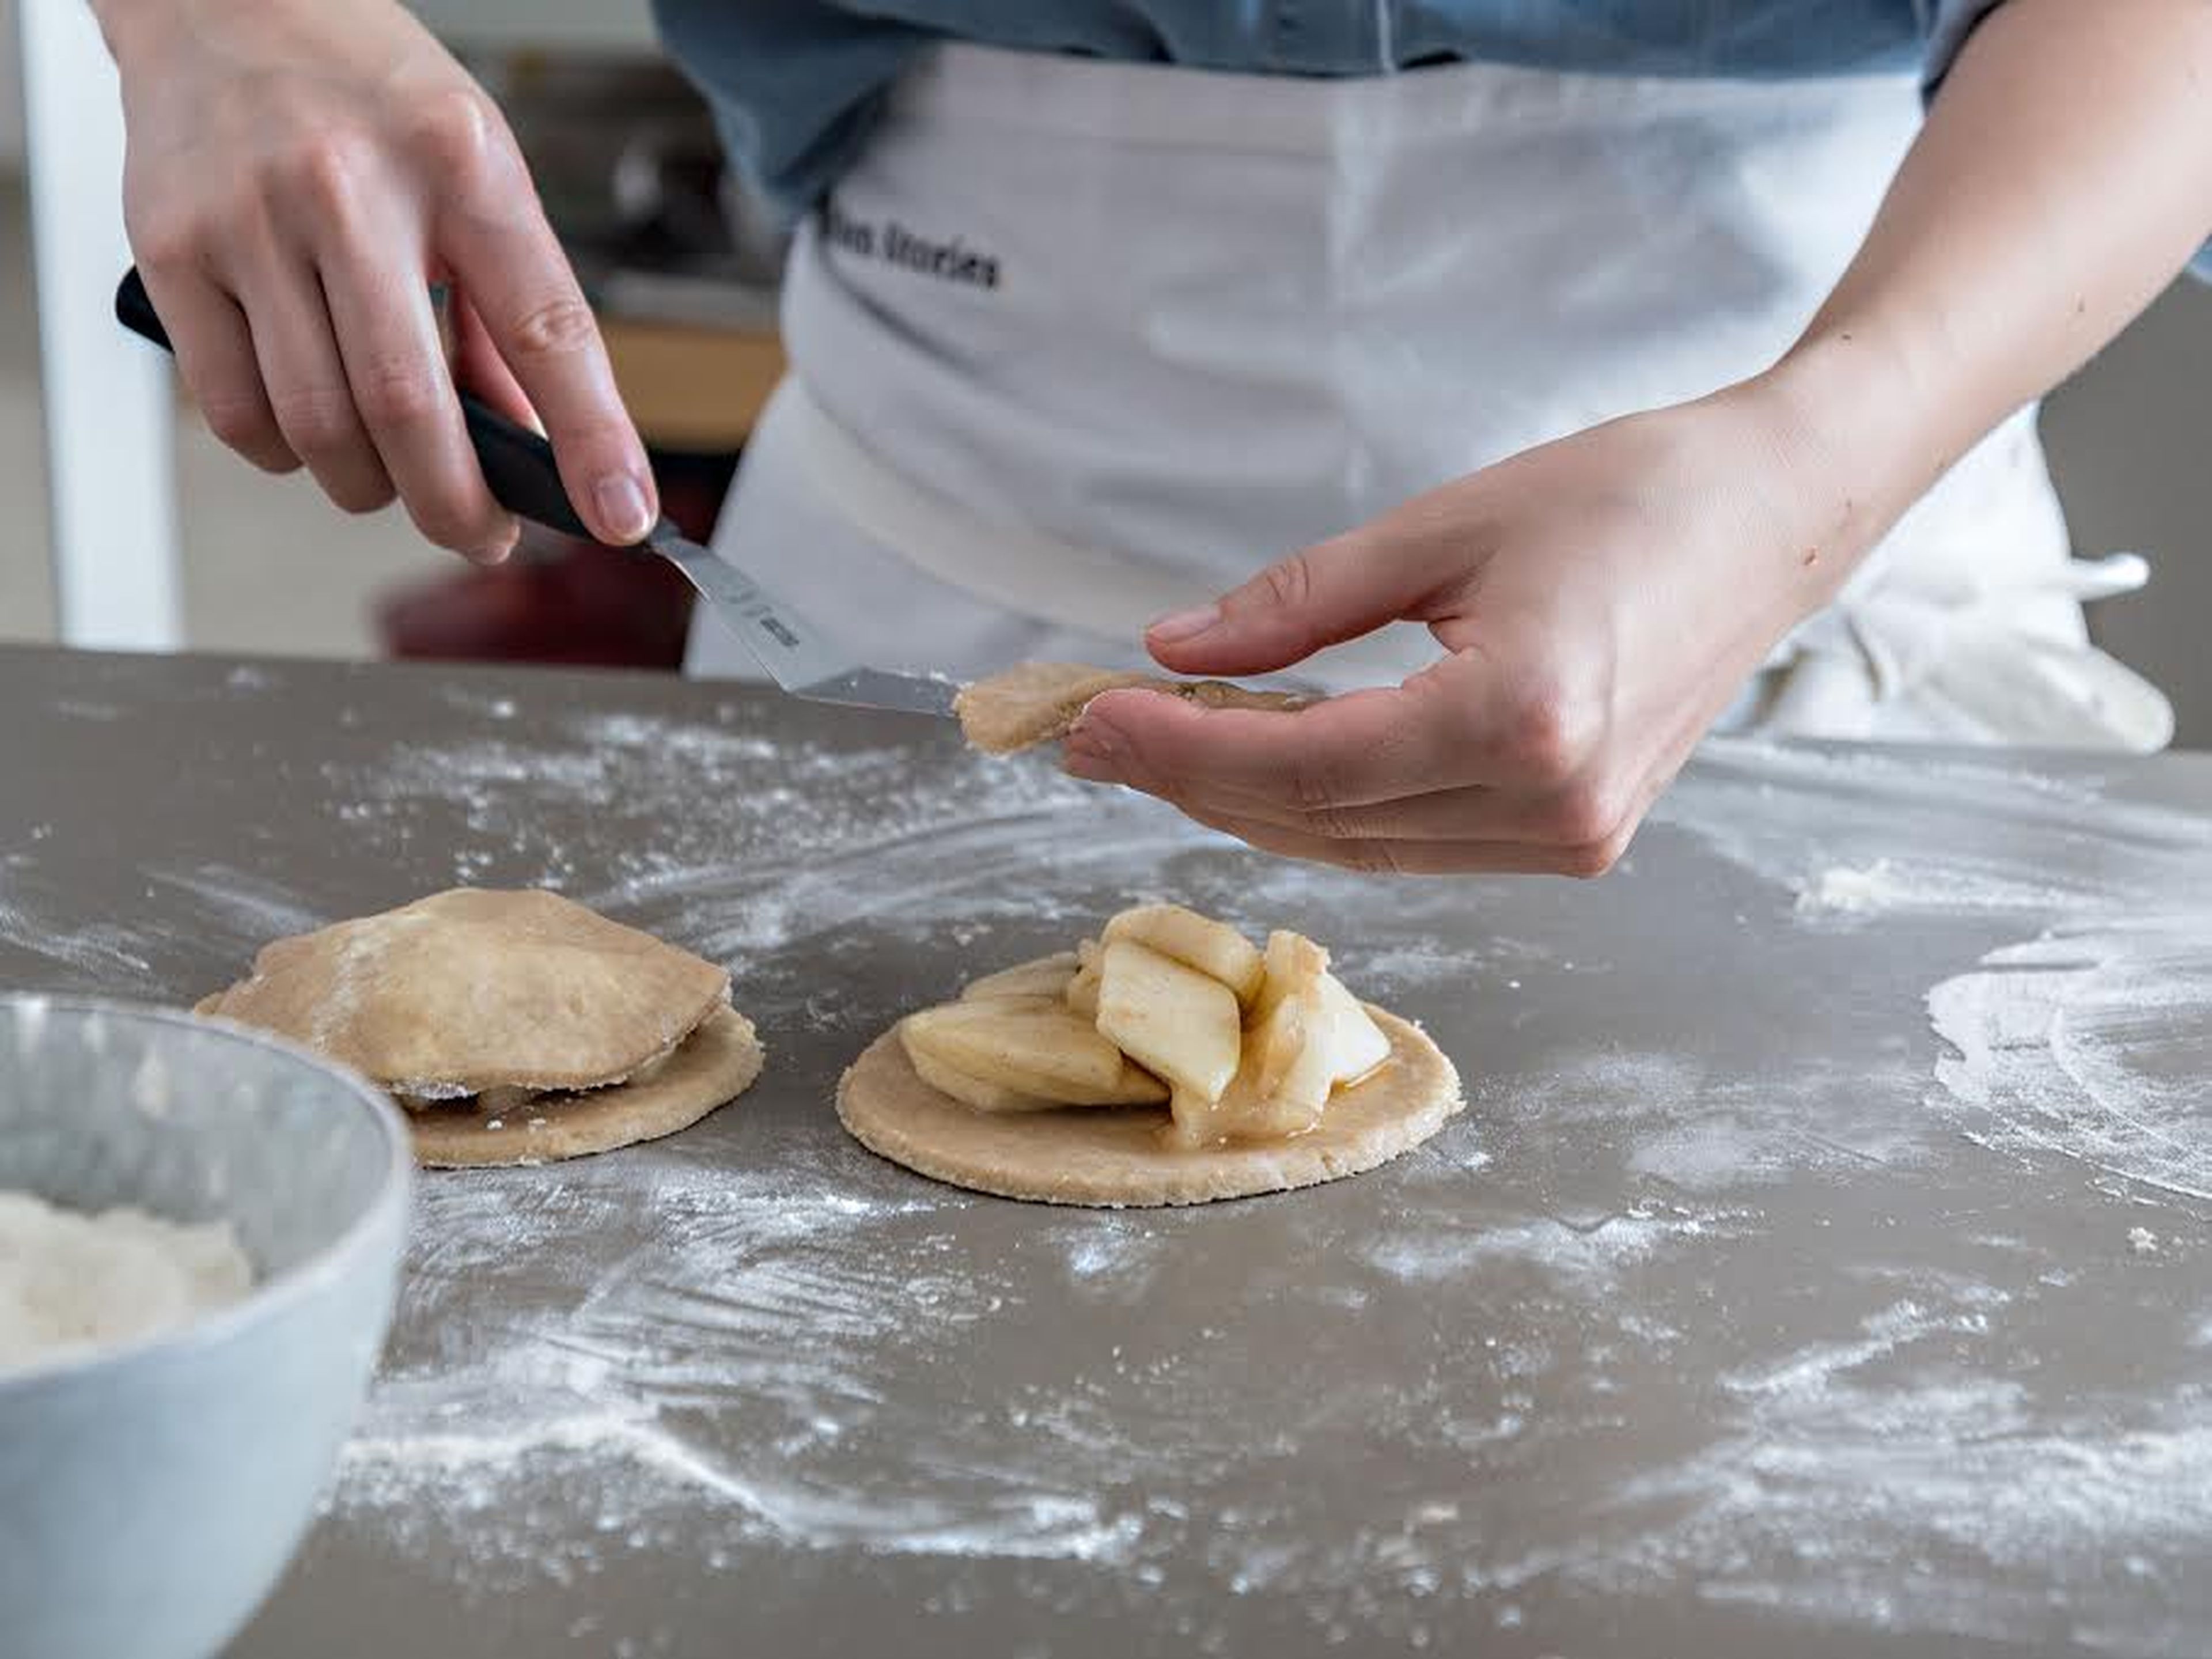 Preheat oven to 200°C/400°F and line a baking sheet with parchment paper. Lightly flour a work surface, unwrap dough, and dust with flour to prevent sticking. Roll out dough (approx. 0.5-cm/0.2-in. thick), and cut out circles using a cookie cutter or a knife. Divide apple filling between half of the dough circles, place the remaining circles on top, and press around the edges with a fork to seal. Transfer to prepared baking sheet.